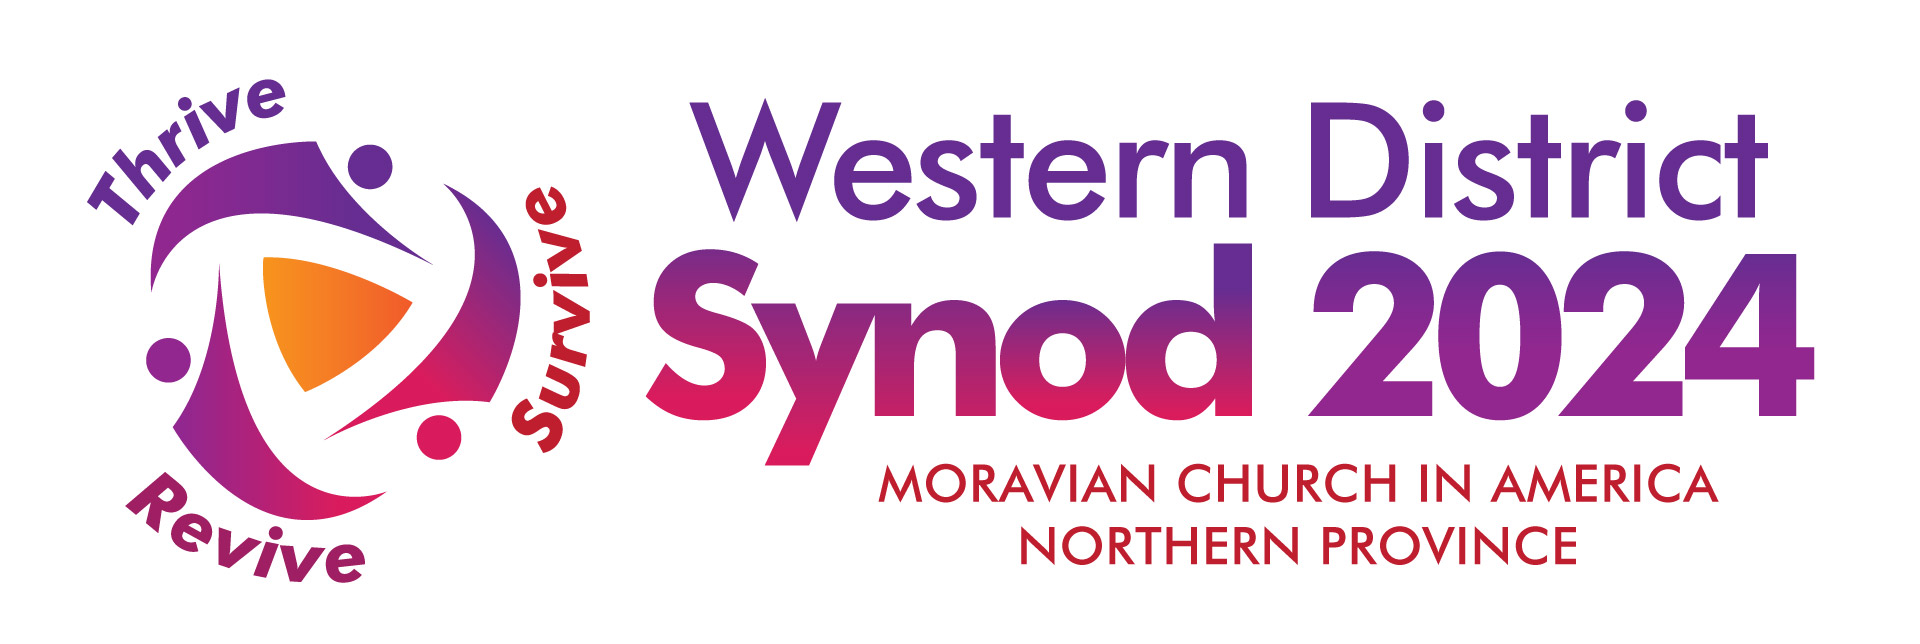 Western District Synod 2024 Moravian Church Northern Province